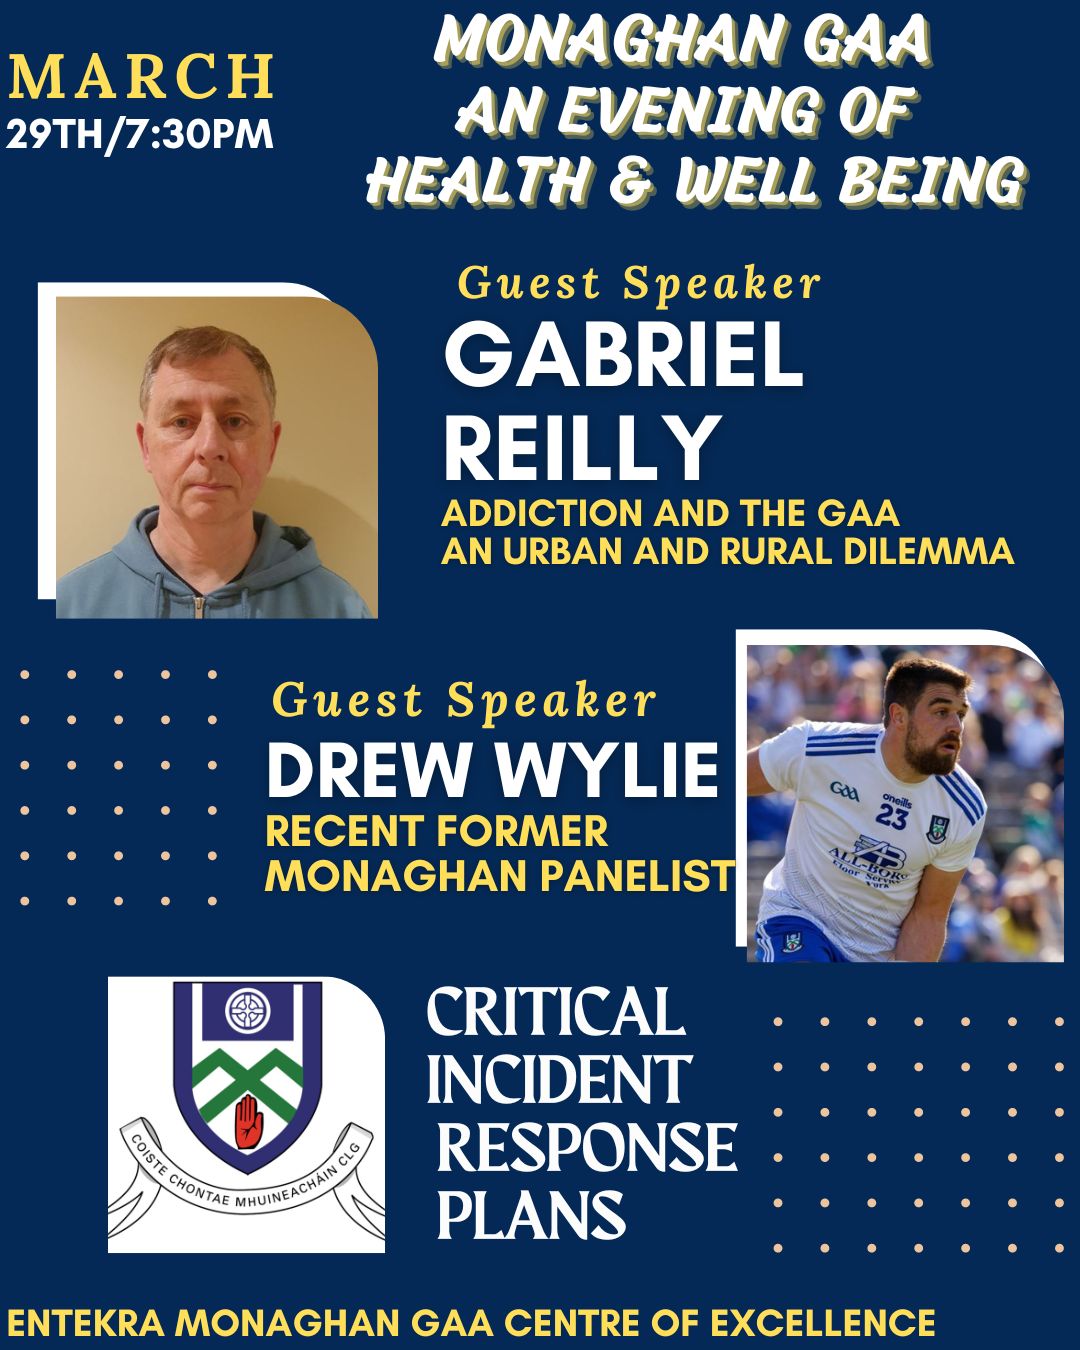 Monaghan GAA Health & Well Being County Committee present  – An evening of Health & WellBeing